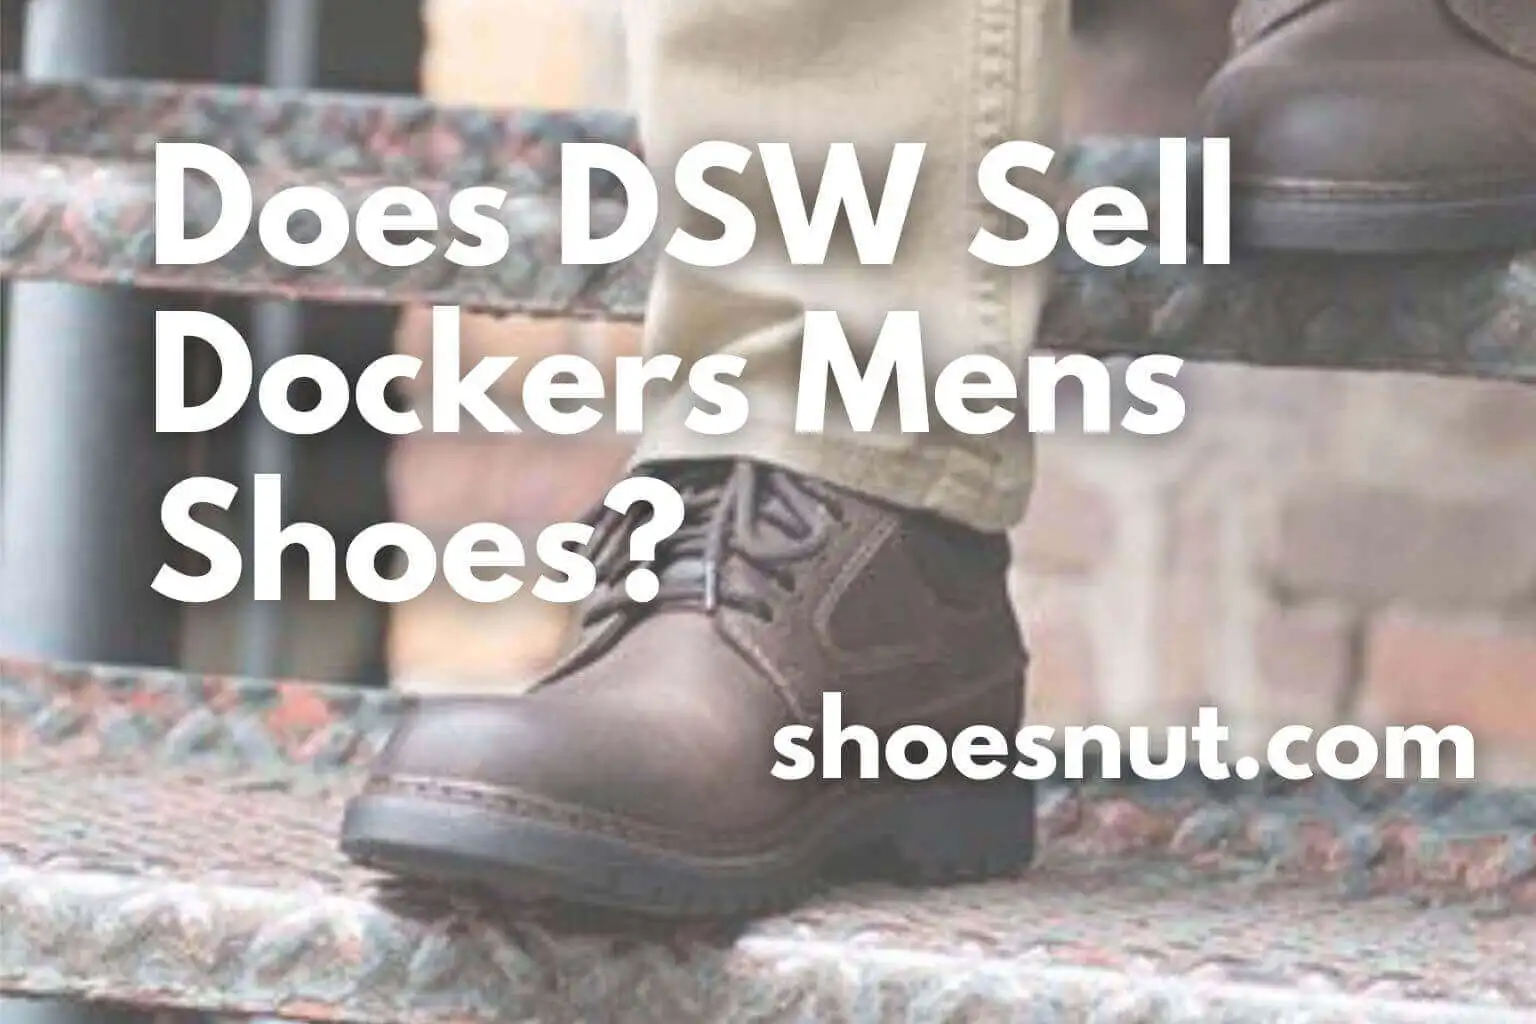 Does DSW Sell Dockers Mens Shoes?